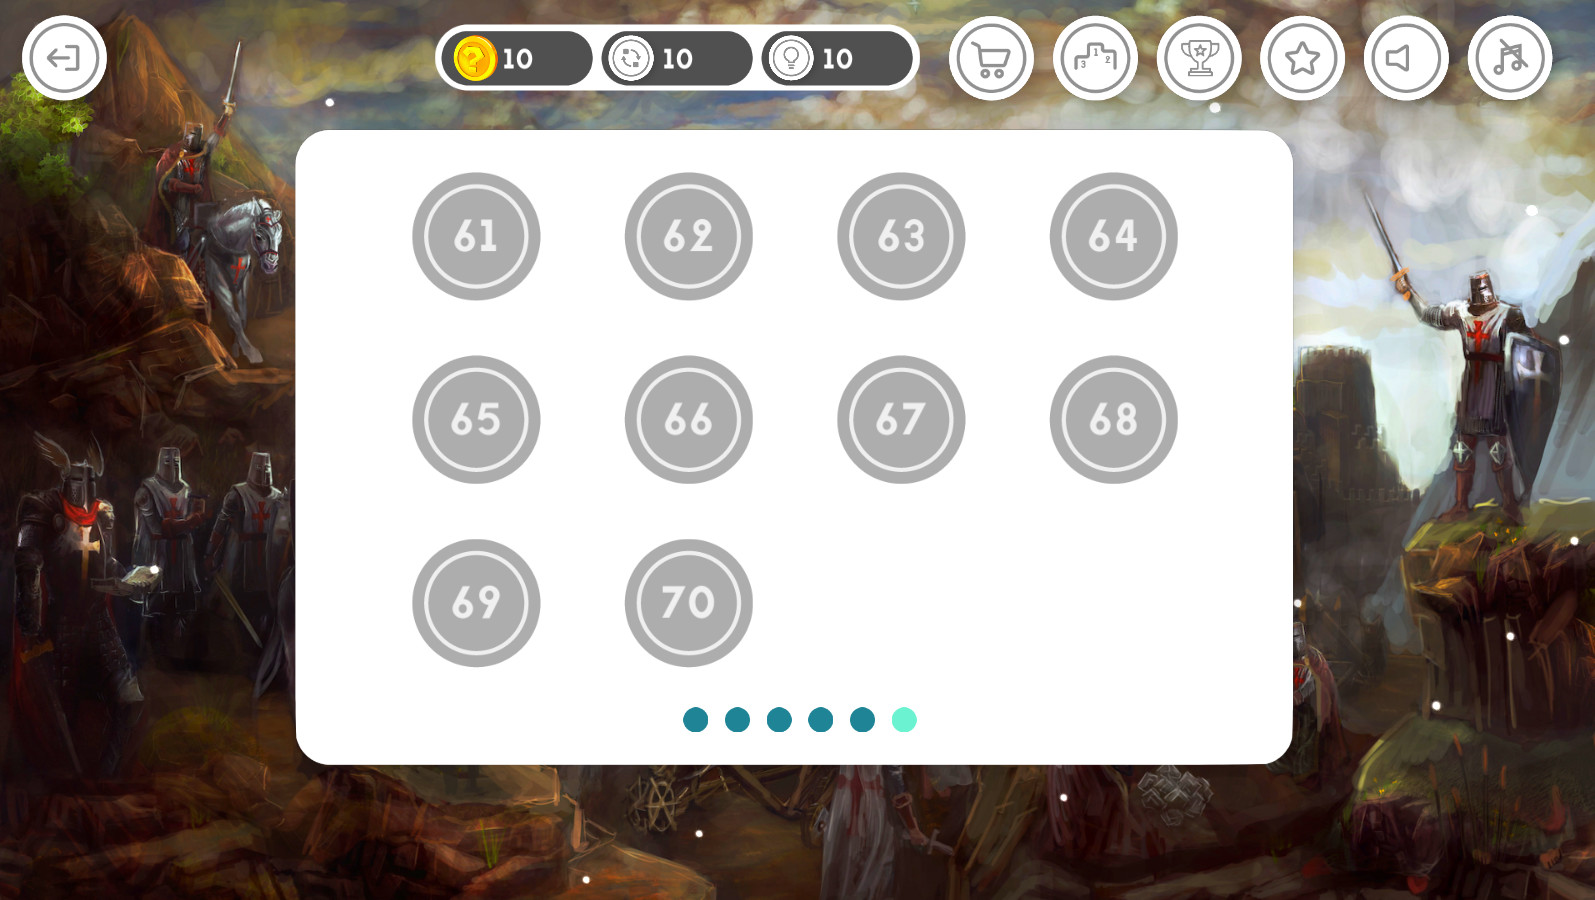 Pair Matching Puzzle Connect - Expansion Pack 7 screenshot